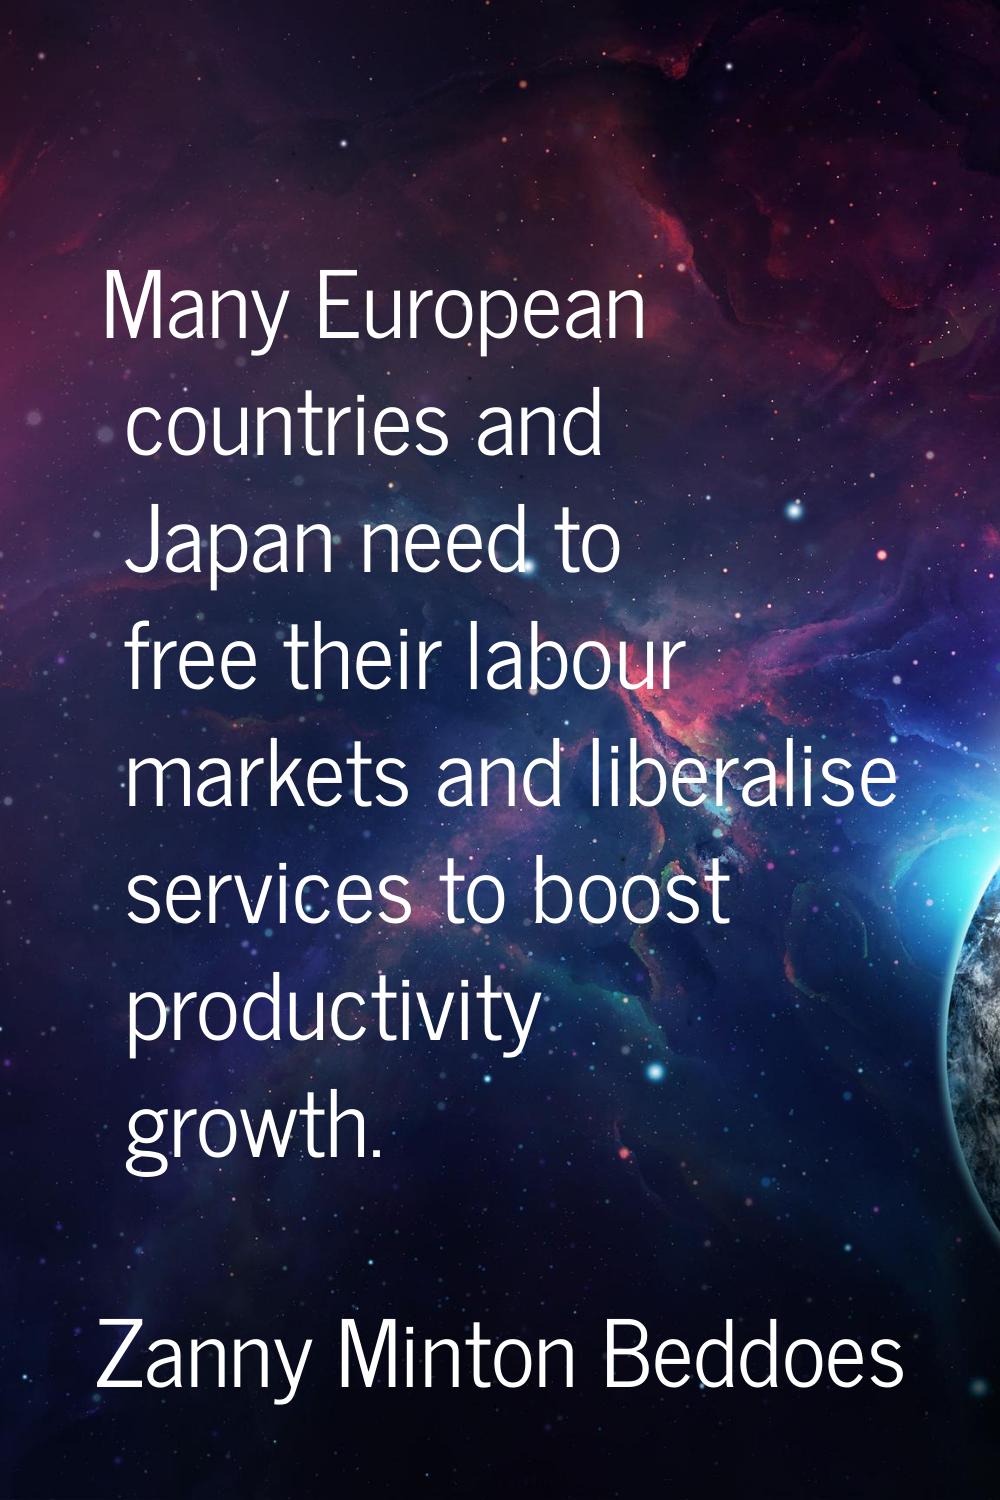 Many European countries and Japan need to free their labour markets and liberalise services to boos